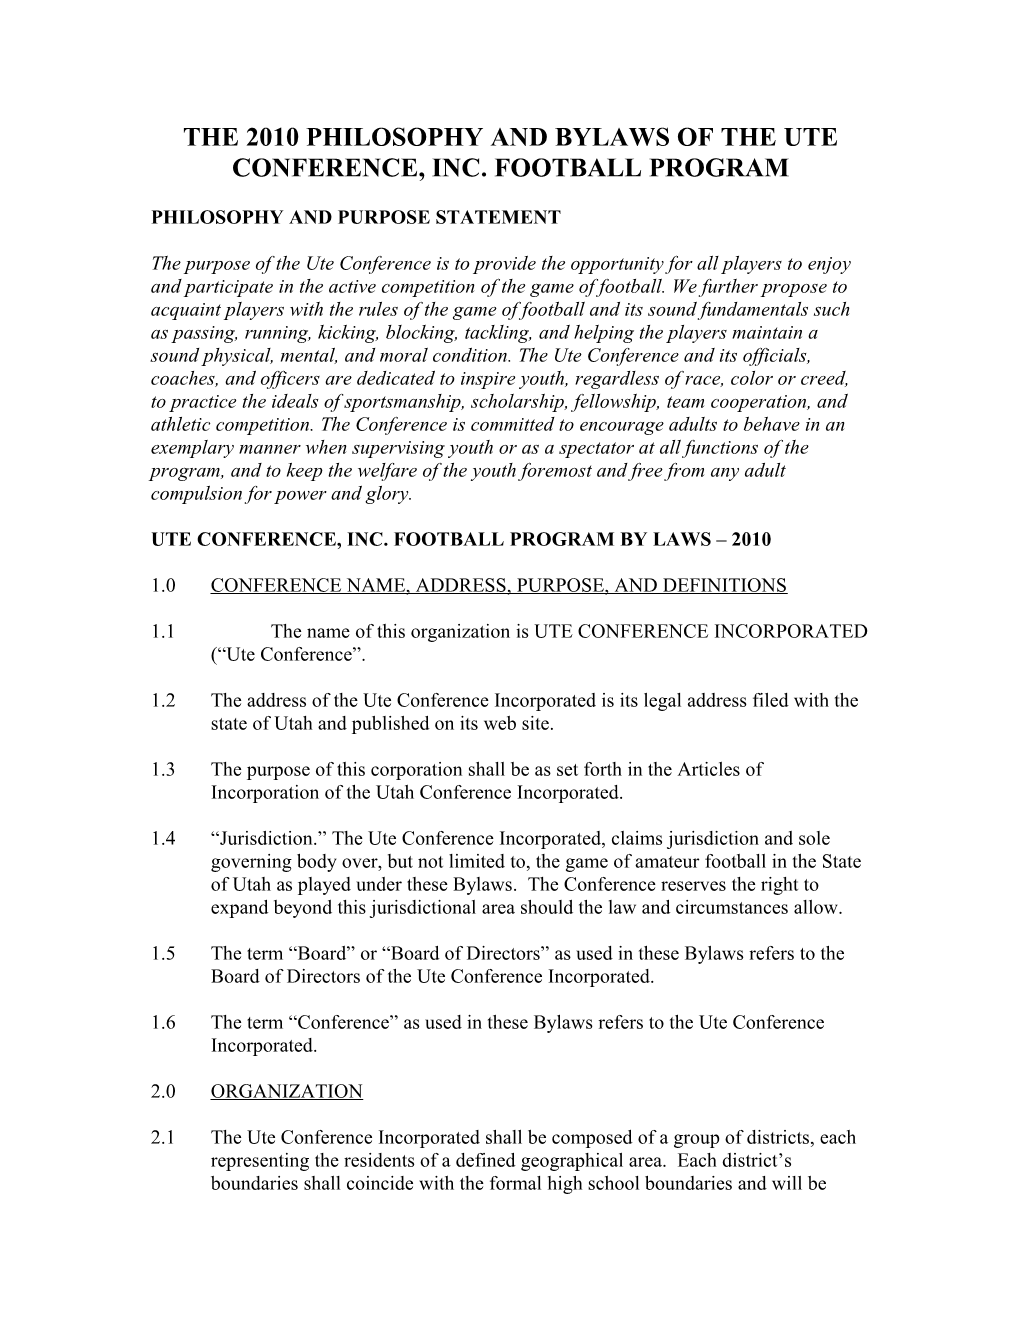 The 2010 Philosophy and Bylaws of the Ute Conference Inc